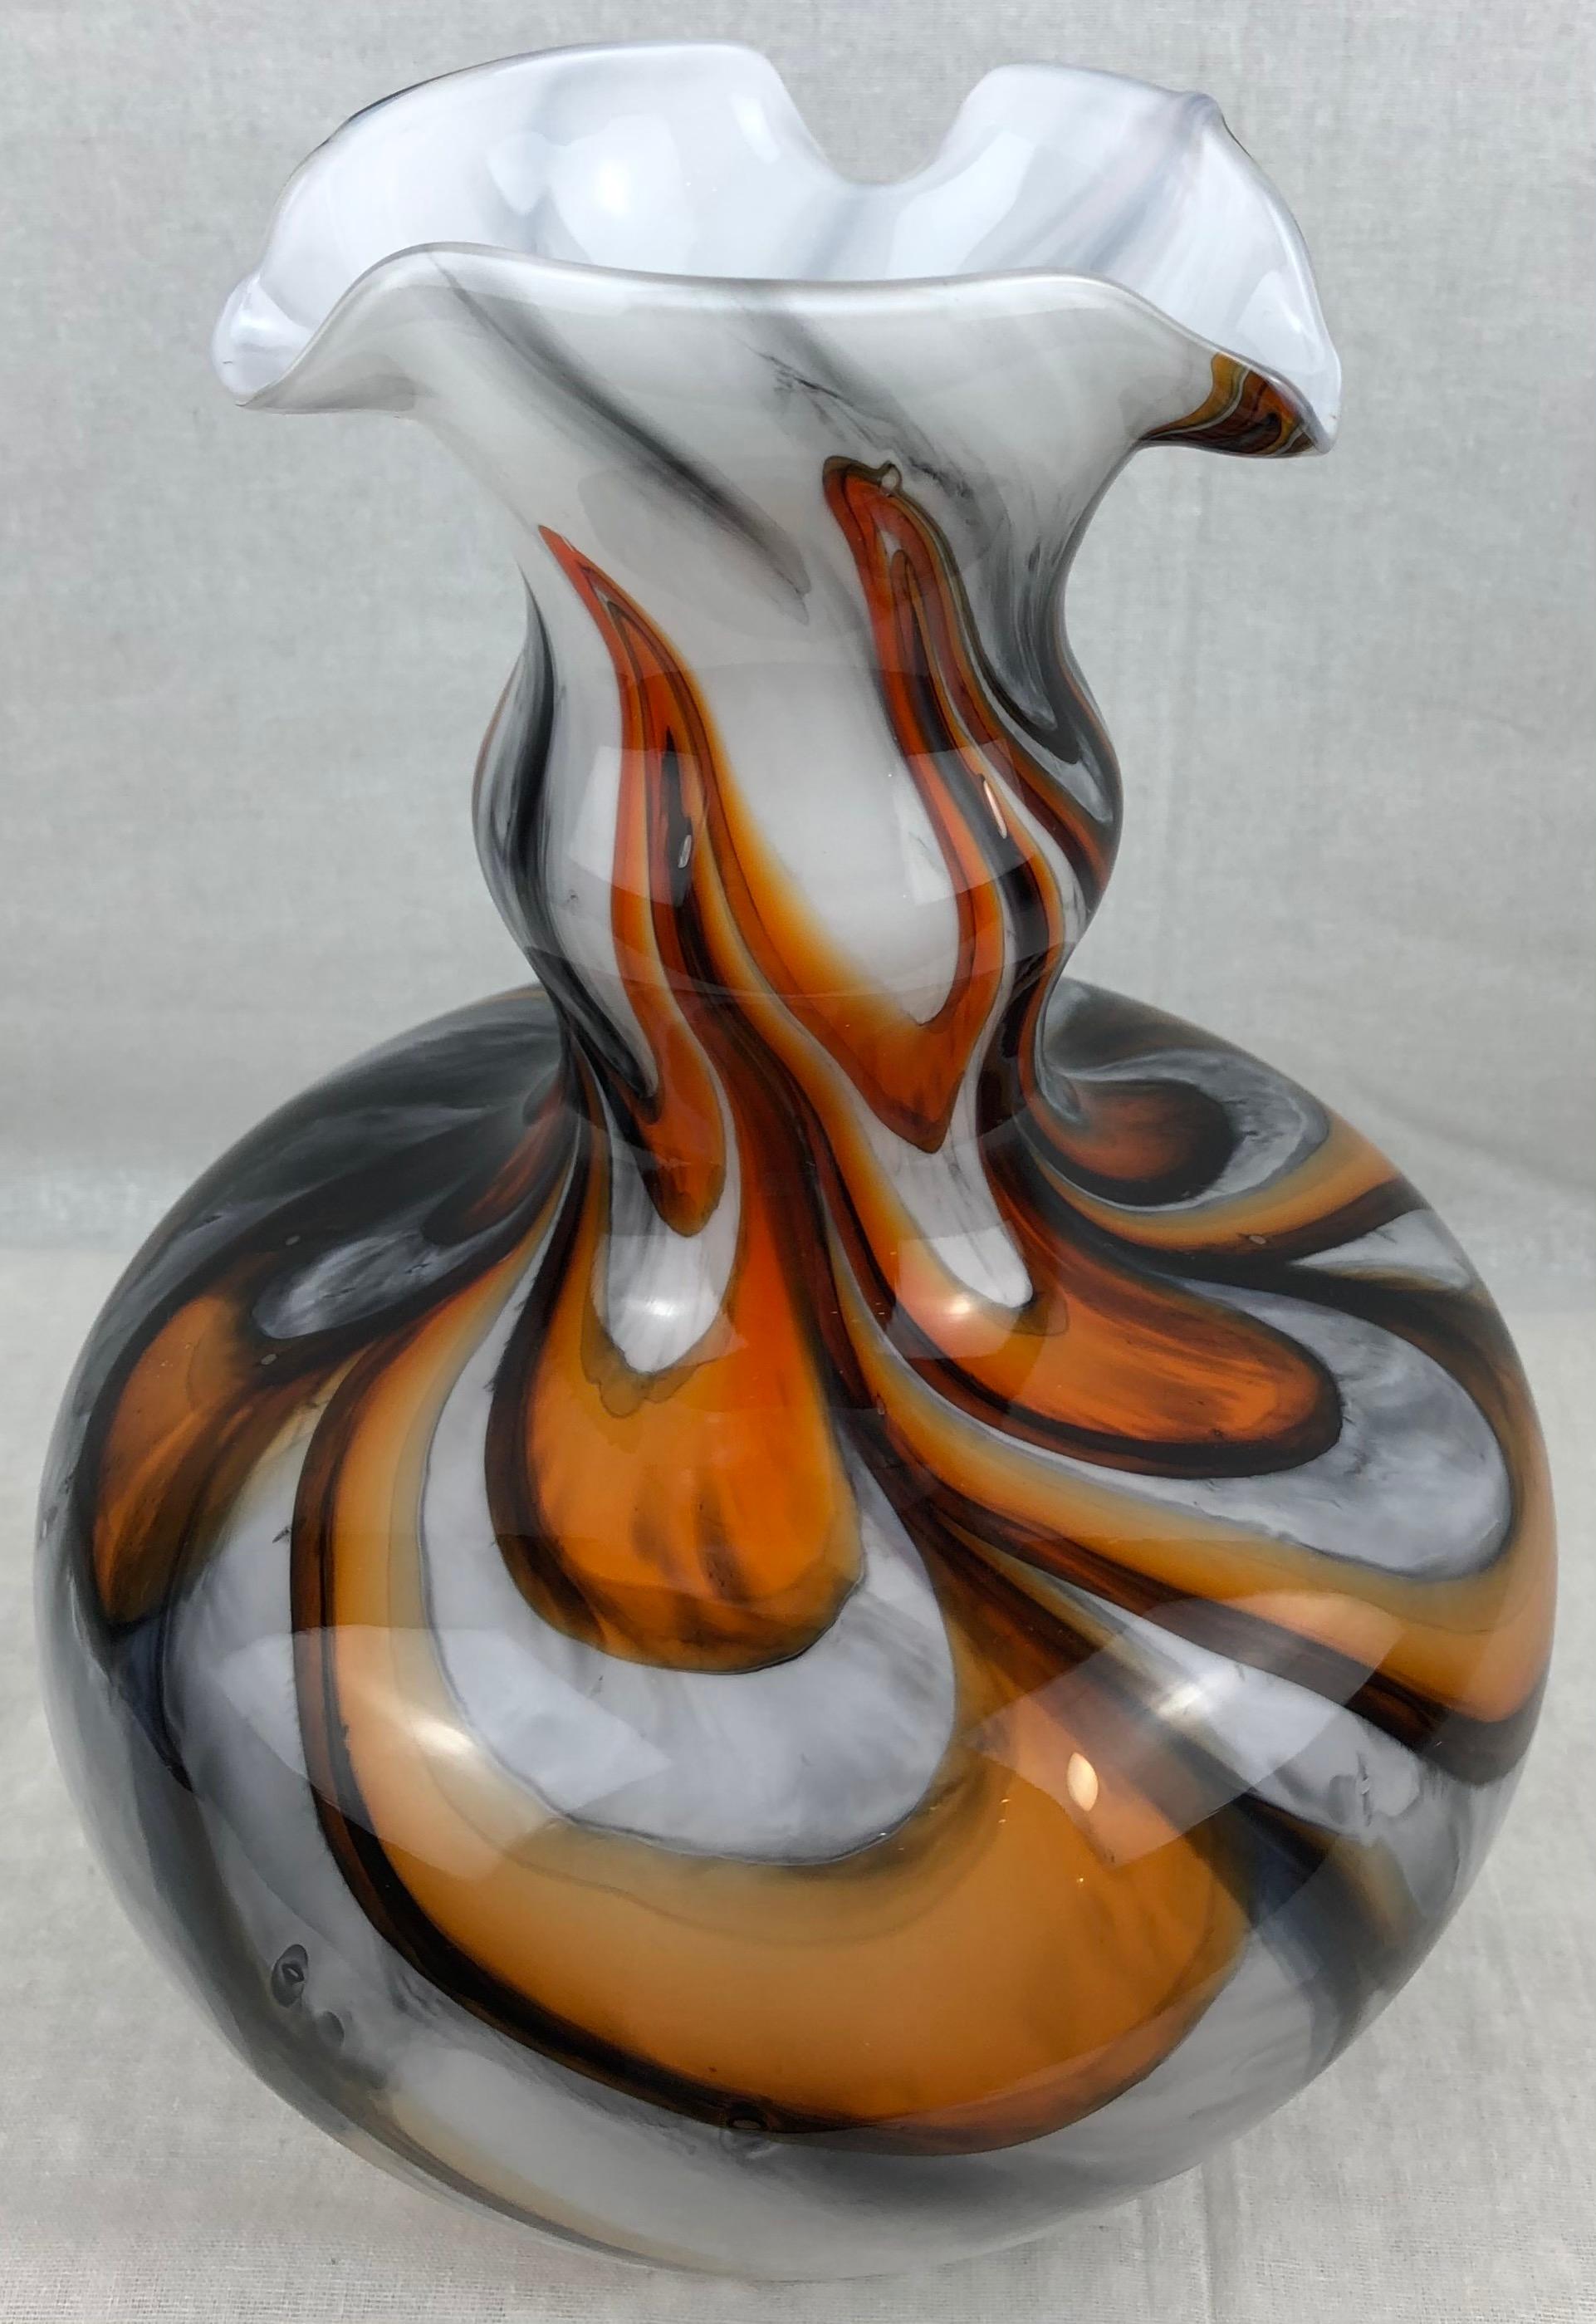 A beautiful white, black and orange art glass vase with swirl motifs. Perfect for displaying on a table, any shelf or counter top. 

Measures: Height 9 5/8 inches
Diameter: 6 3/8 inches

Perfect vintage condition, no cracks or chips.

 